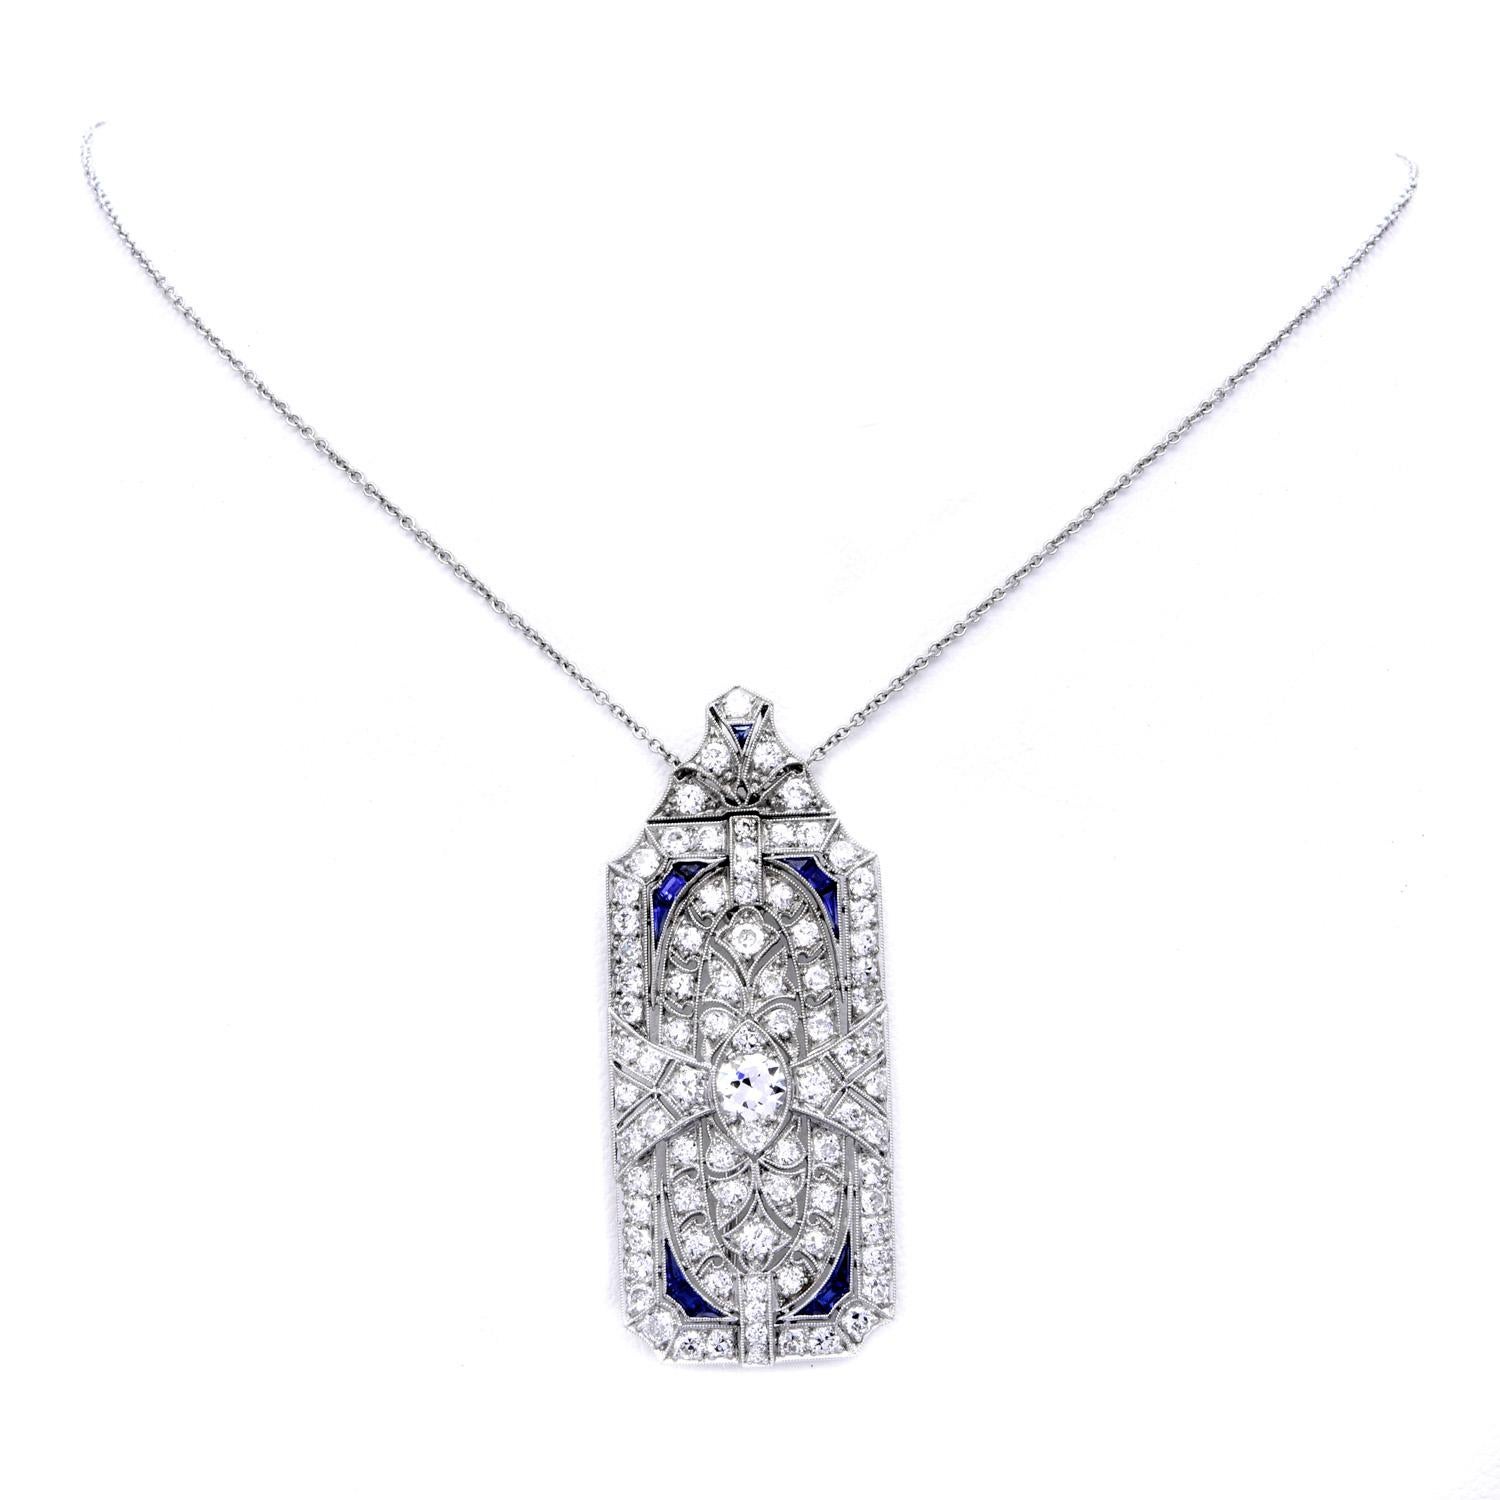 This very fine antique Designer Art deco 1920's diamond pendant Necklace and Brooch Pin was inspired by a floral motif and crafted in Luxurious Platinum.

Featuring round cut diamonds throughout weighing collectively appx. 2.40 carats.

Diamonds are